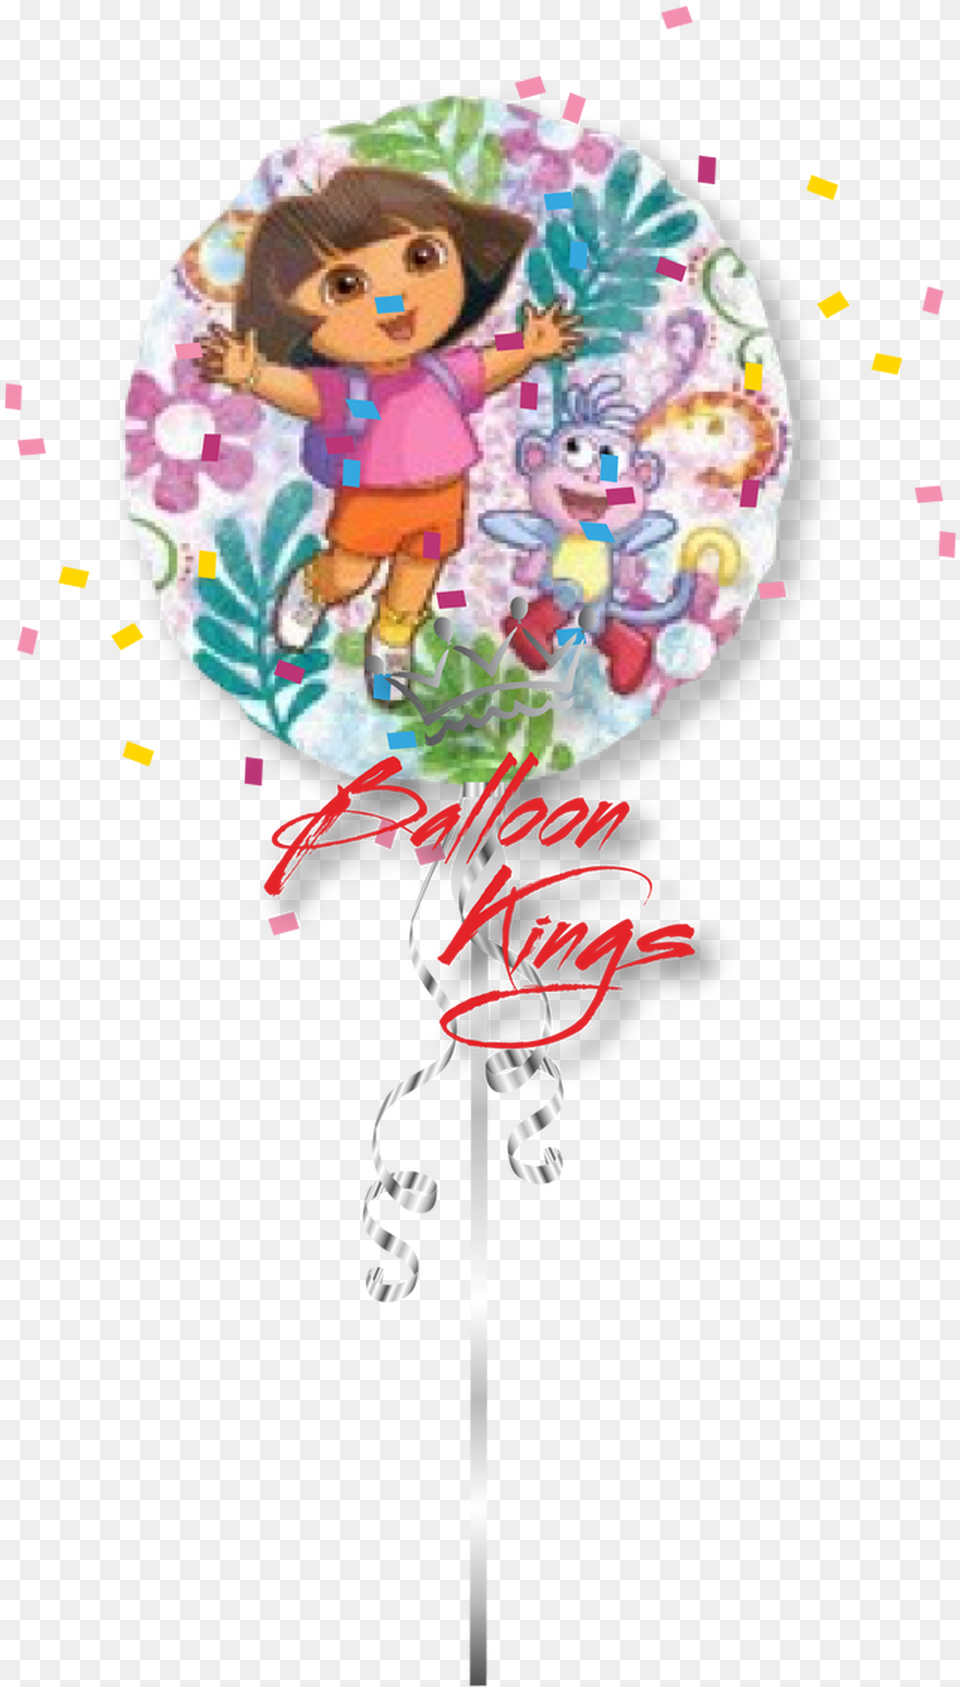 Dora The Explorer Illustration, Food, Sweets, Baby, Candy Png Image